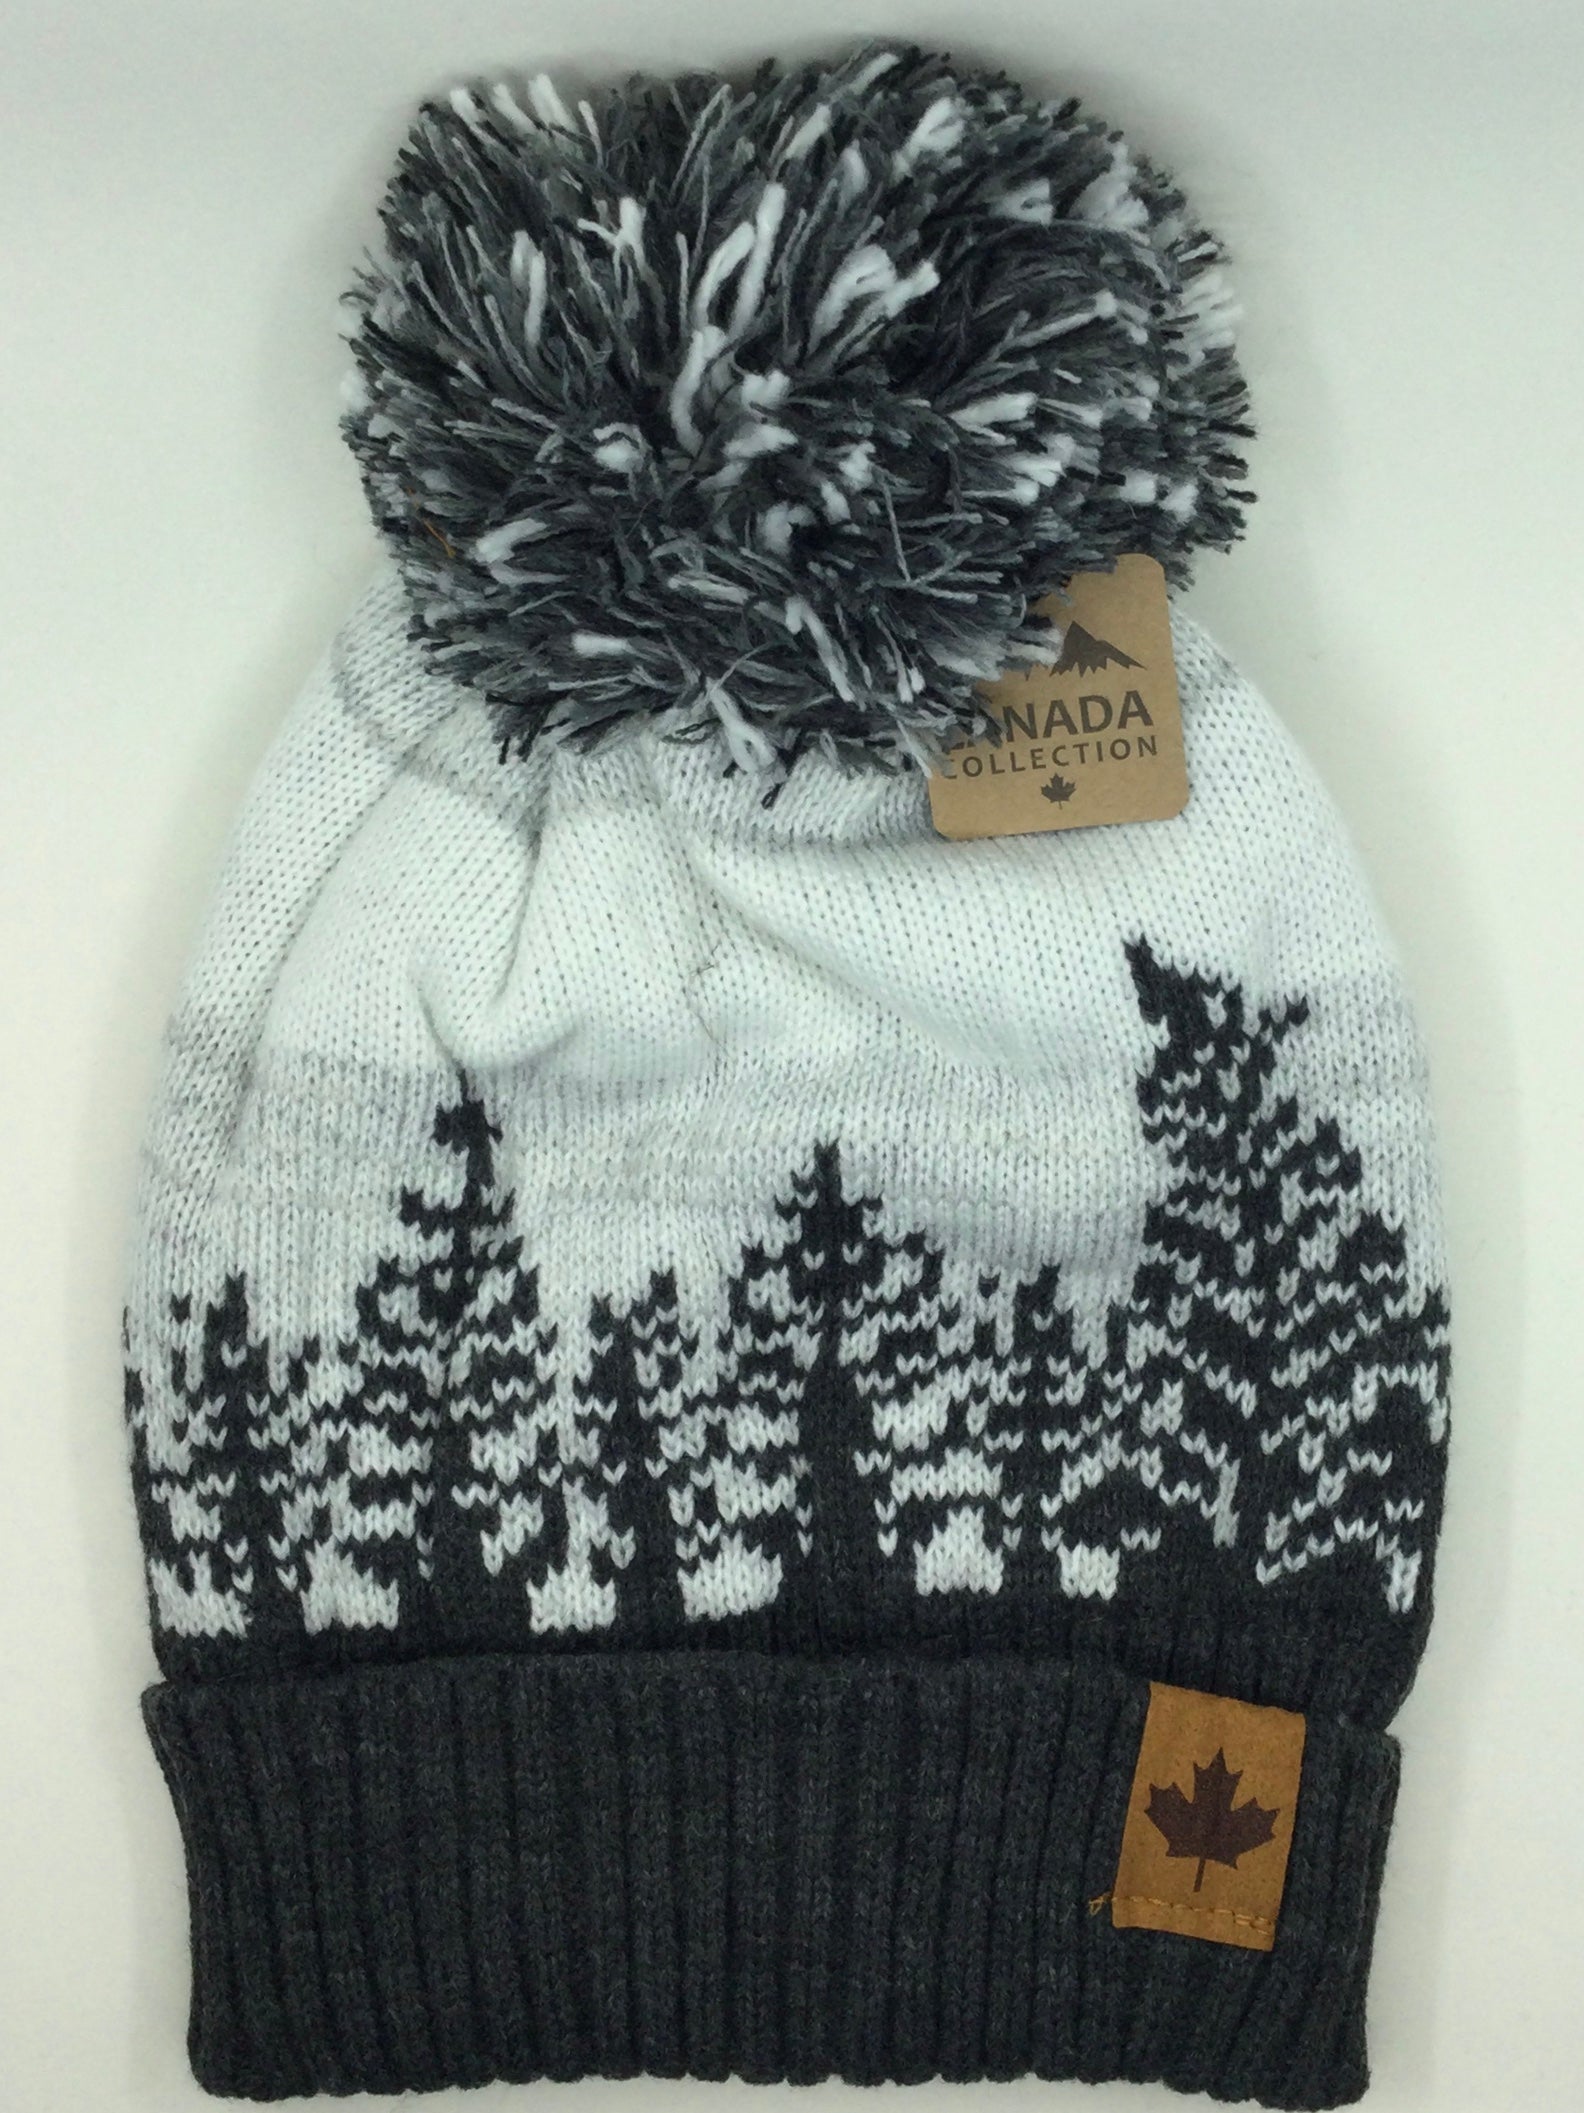 Canada Collection Knitted Tree Toque